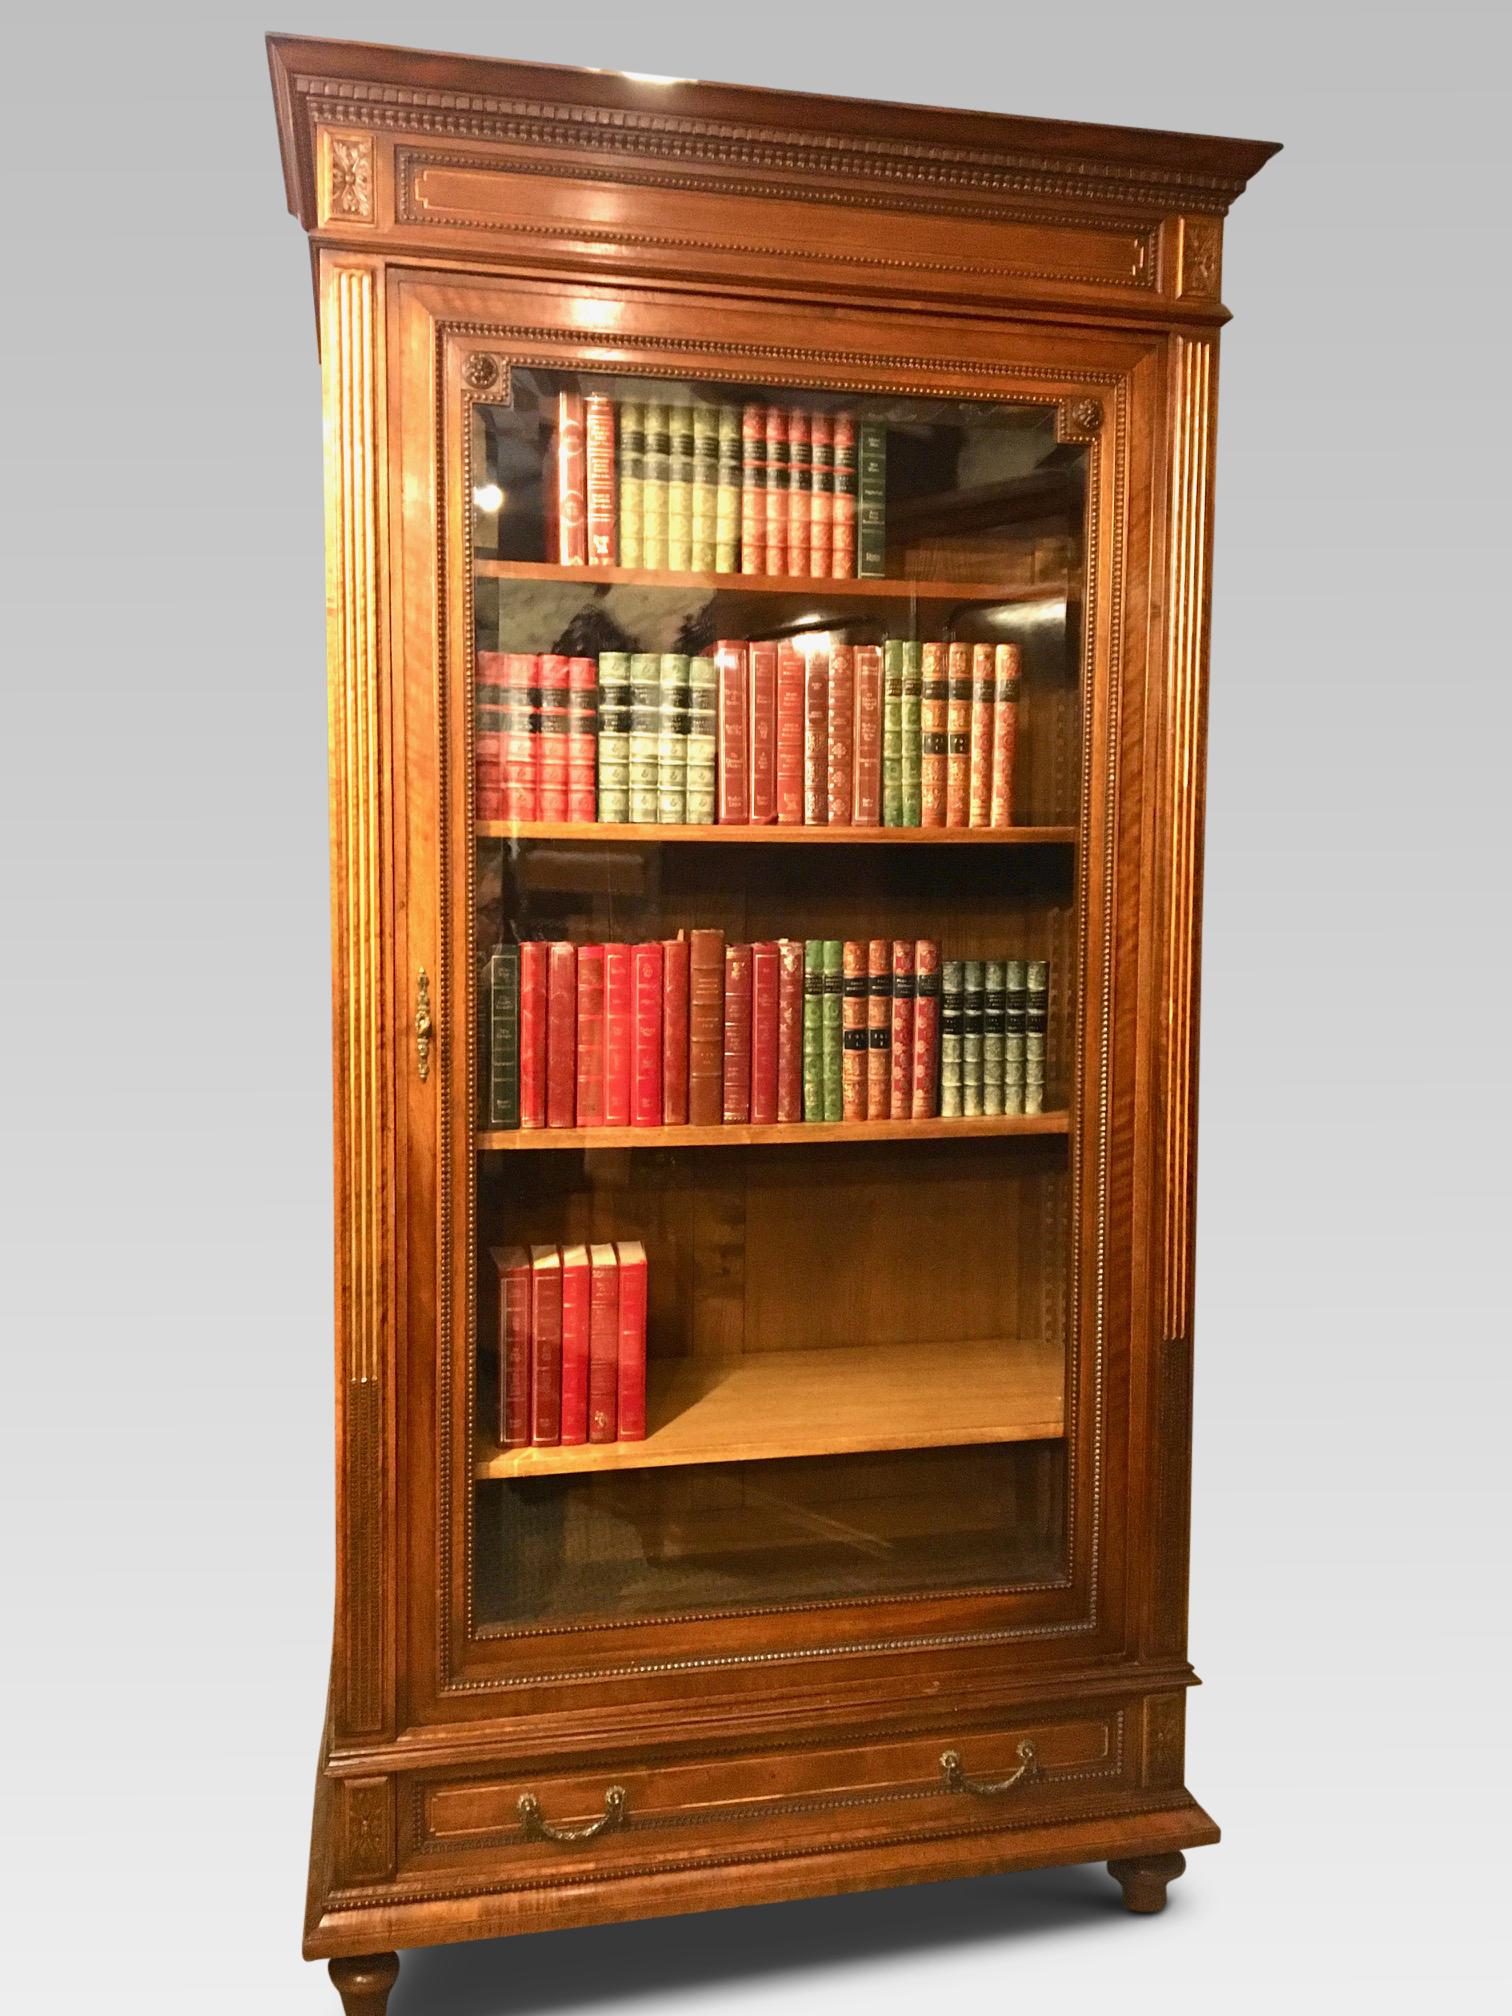 We are pleased to offer for sale this elegant late 19th century French walnut bookcase.
Constructed in solid Walnut in the late 1800s, this delightful bookcase is a work of considerable
craftsmanship. The door has its original bevelled glass, behind